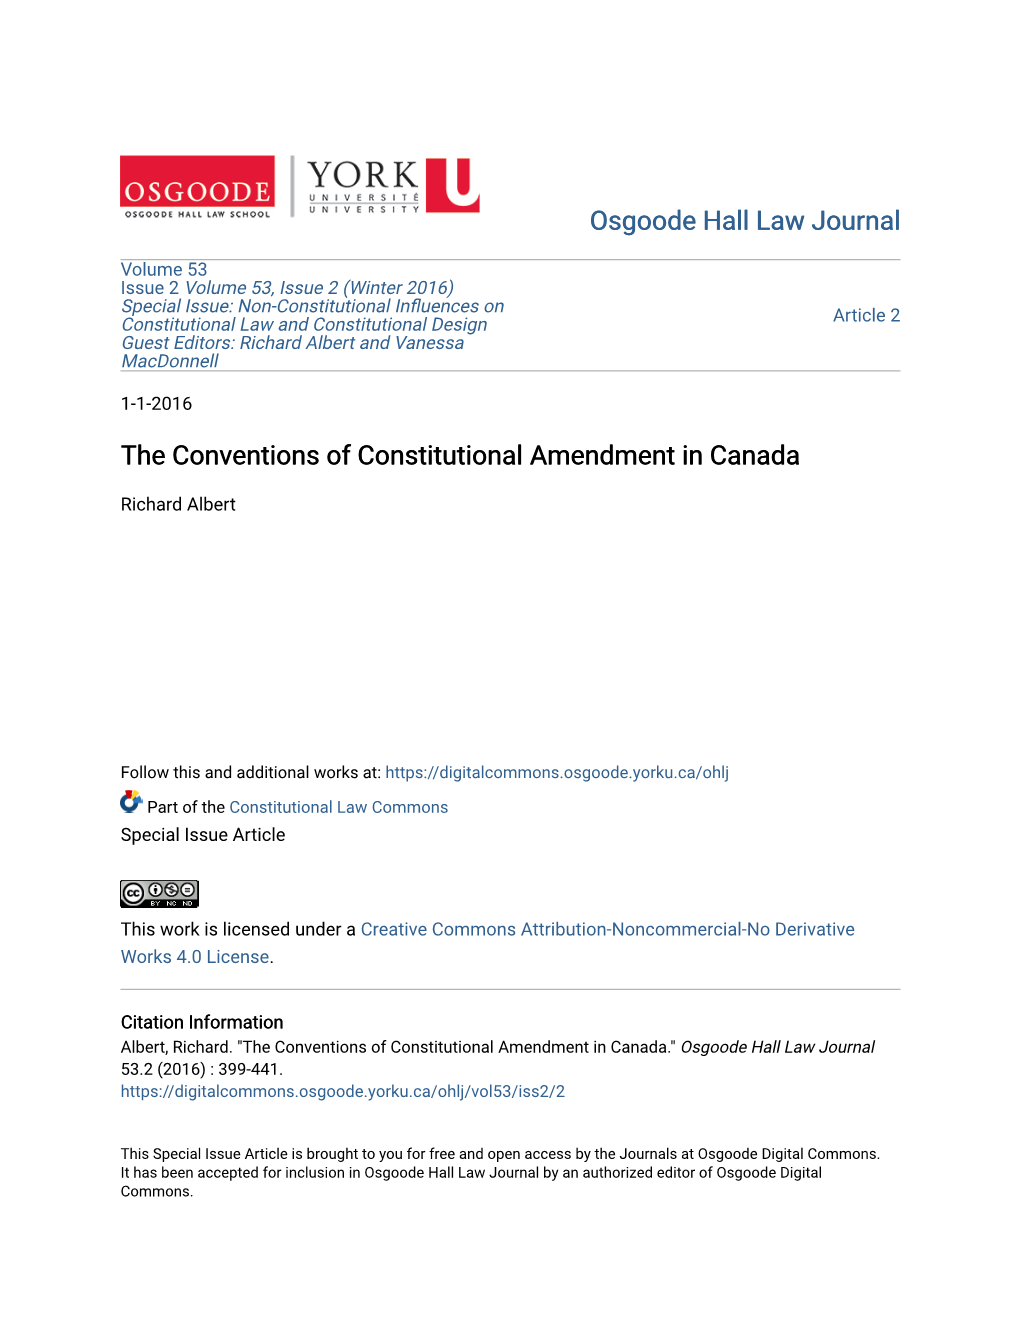 The Conventions of Constitutional Amendment in Canada